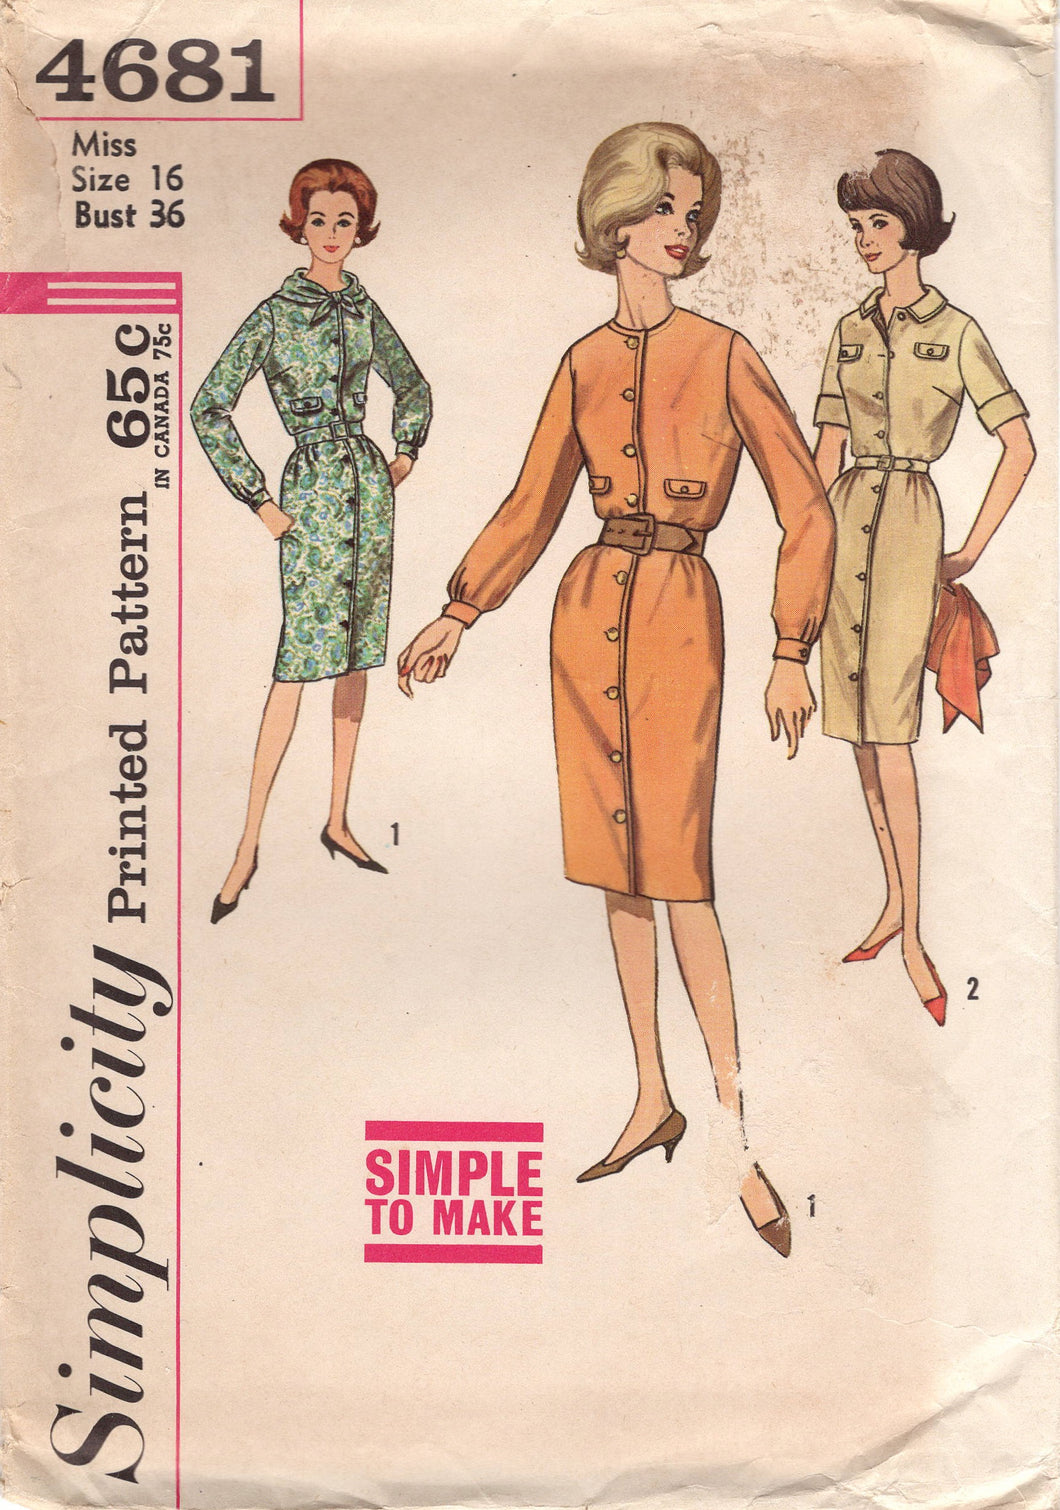 1960's Simplicity One Piece Straight line Dress with or without collar - Bust 36